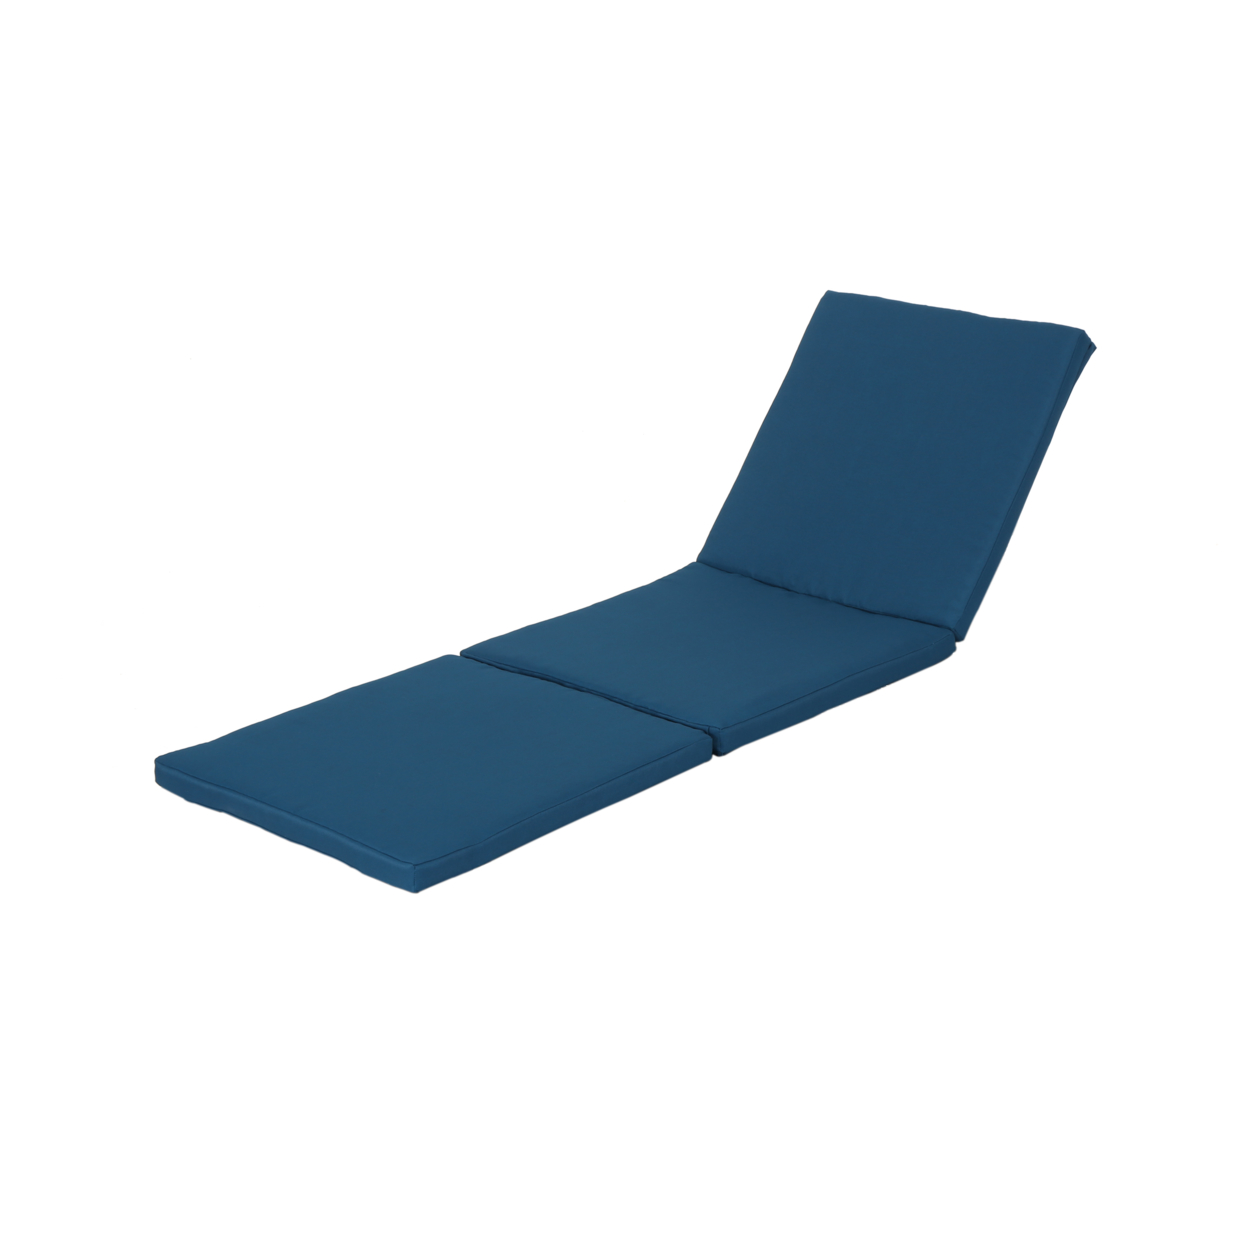 Laraine Outdoor Water Resistant Chaise Lounge Cushion - Blue